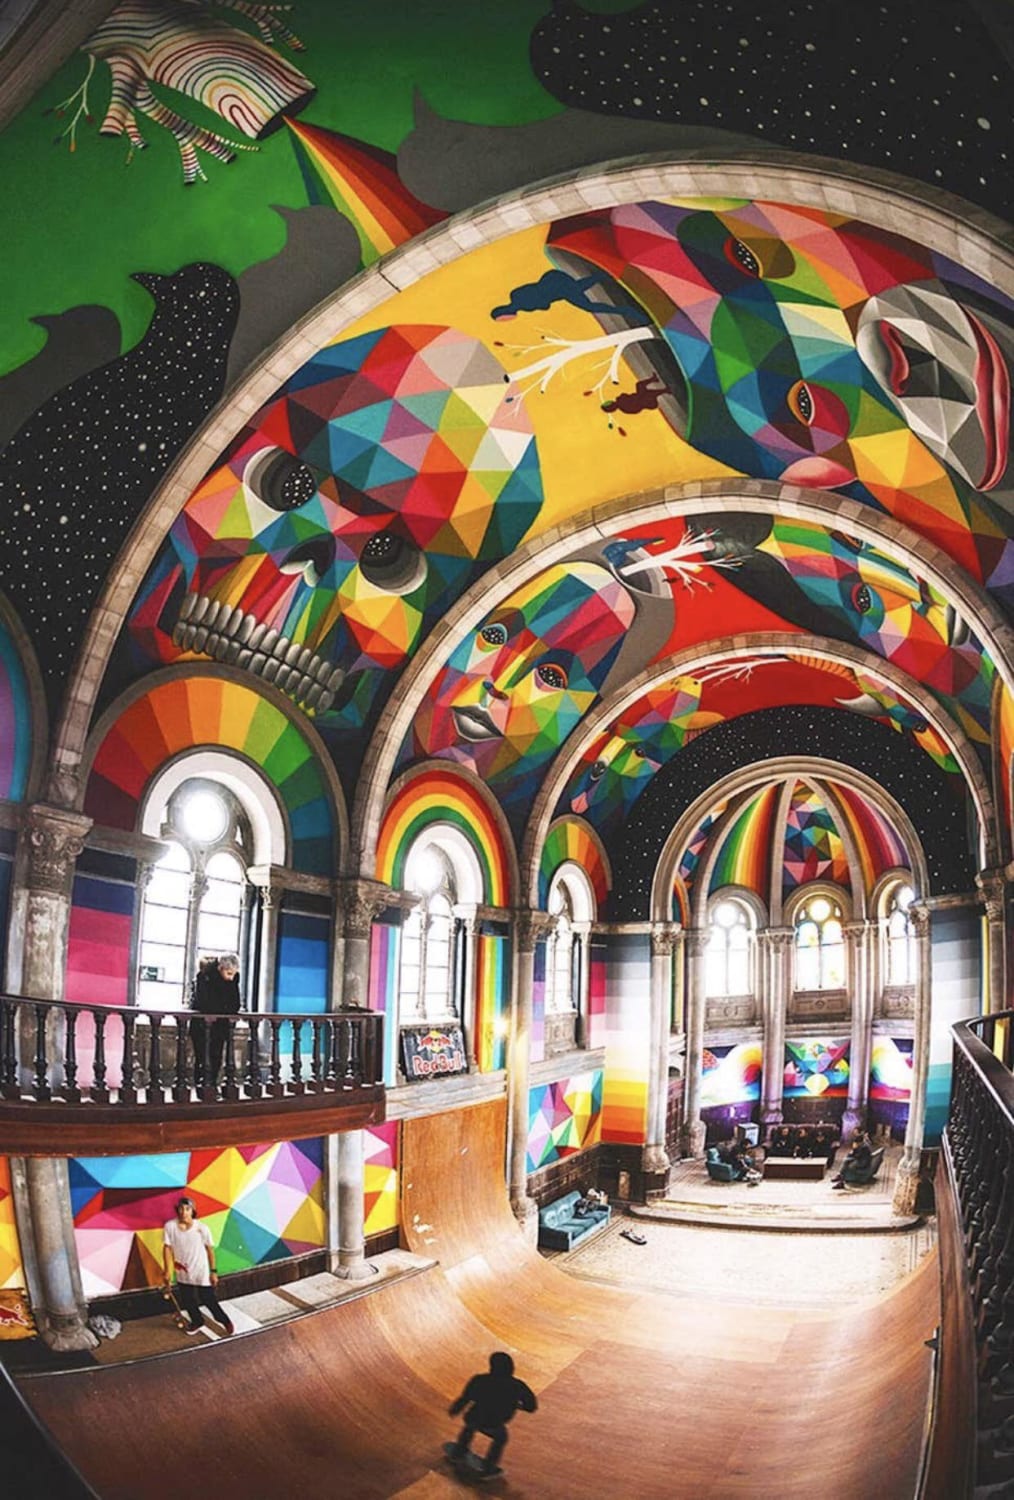 This is a 100 year old church in Spain that was repurposed into a skatepark